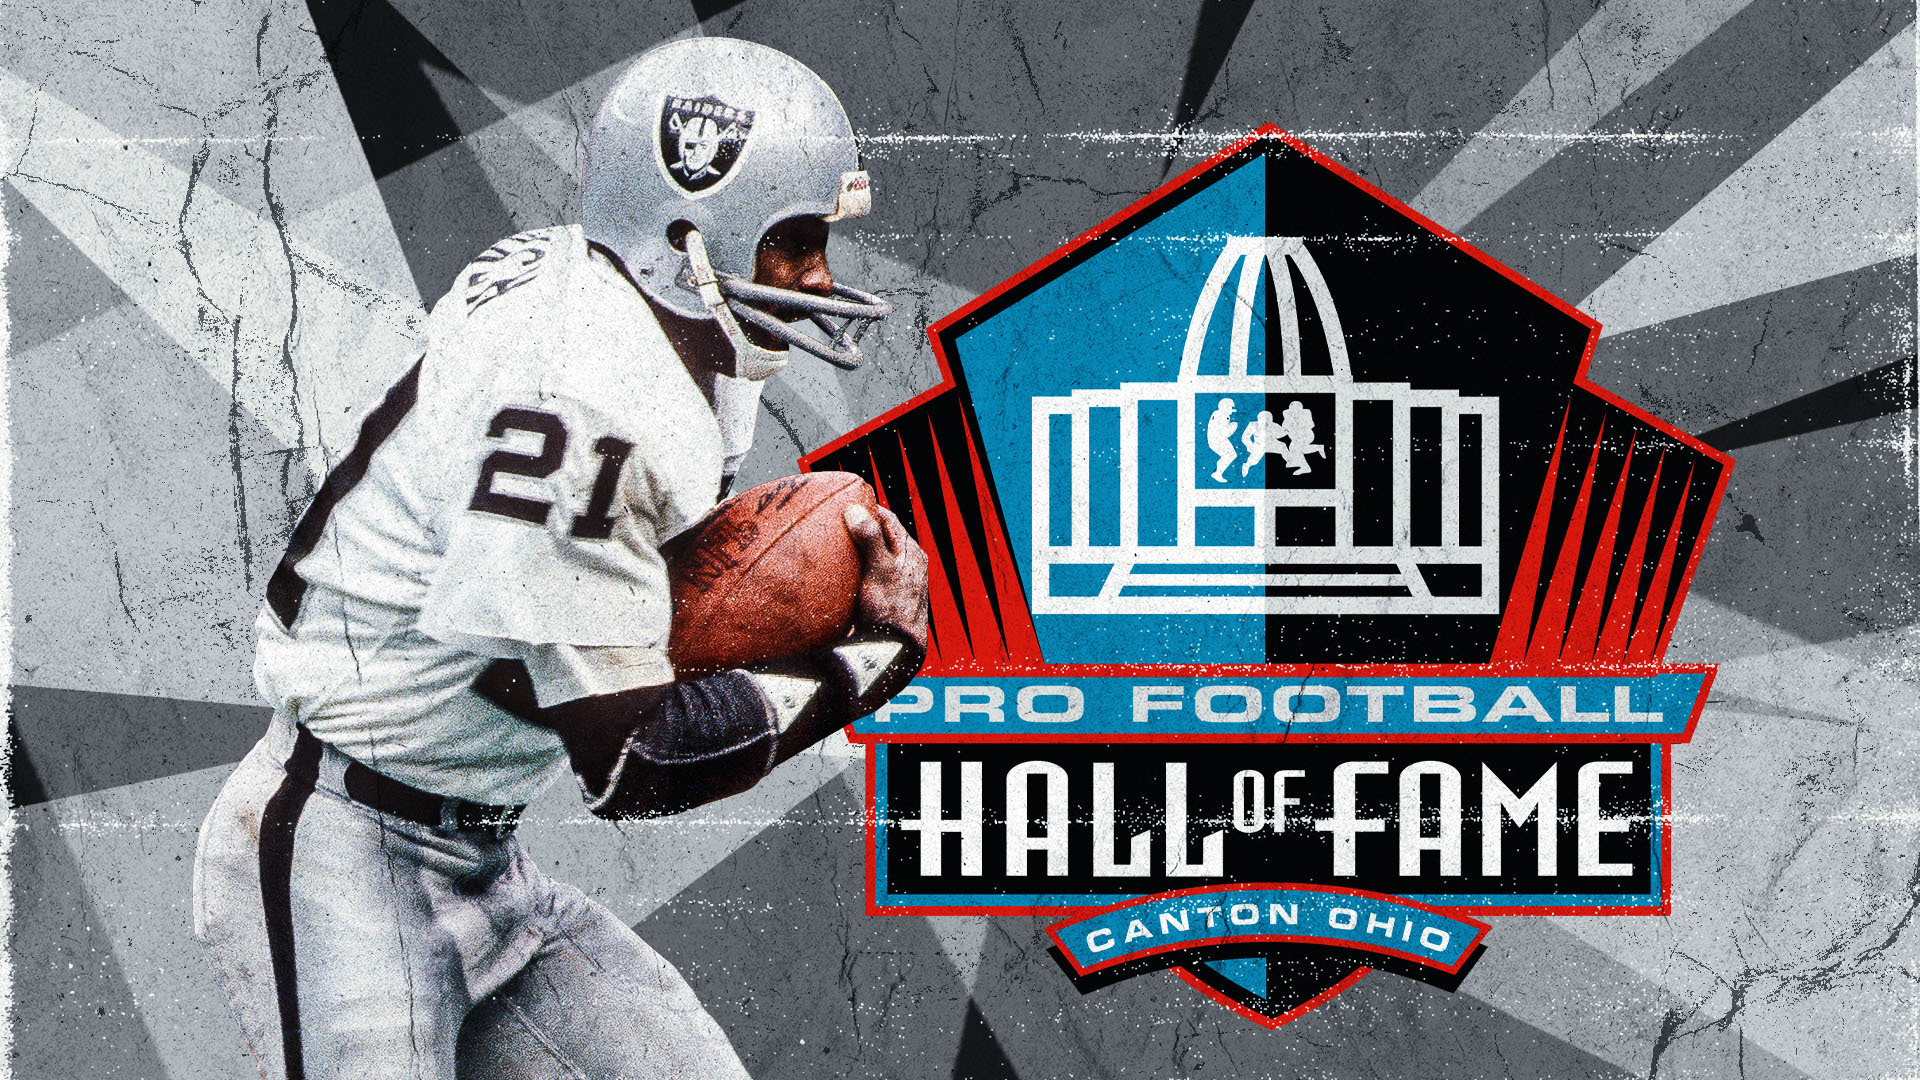 Hall of Fame inductee Cliff Branch was 'a Raider through and through'